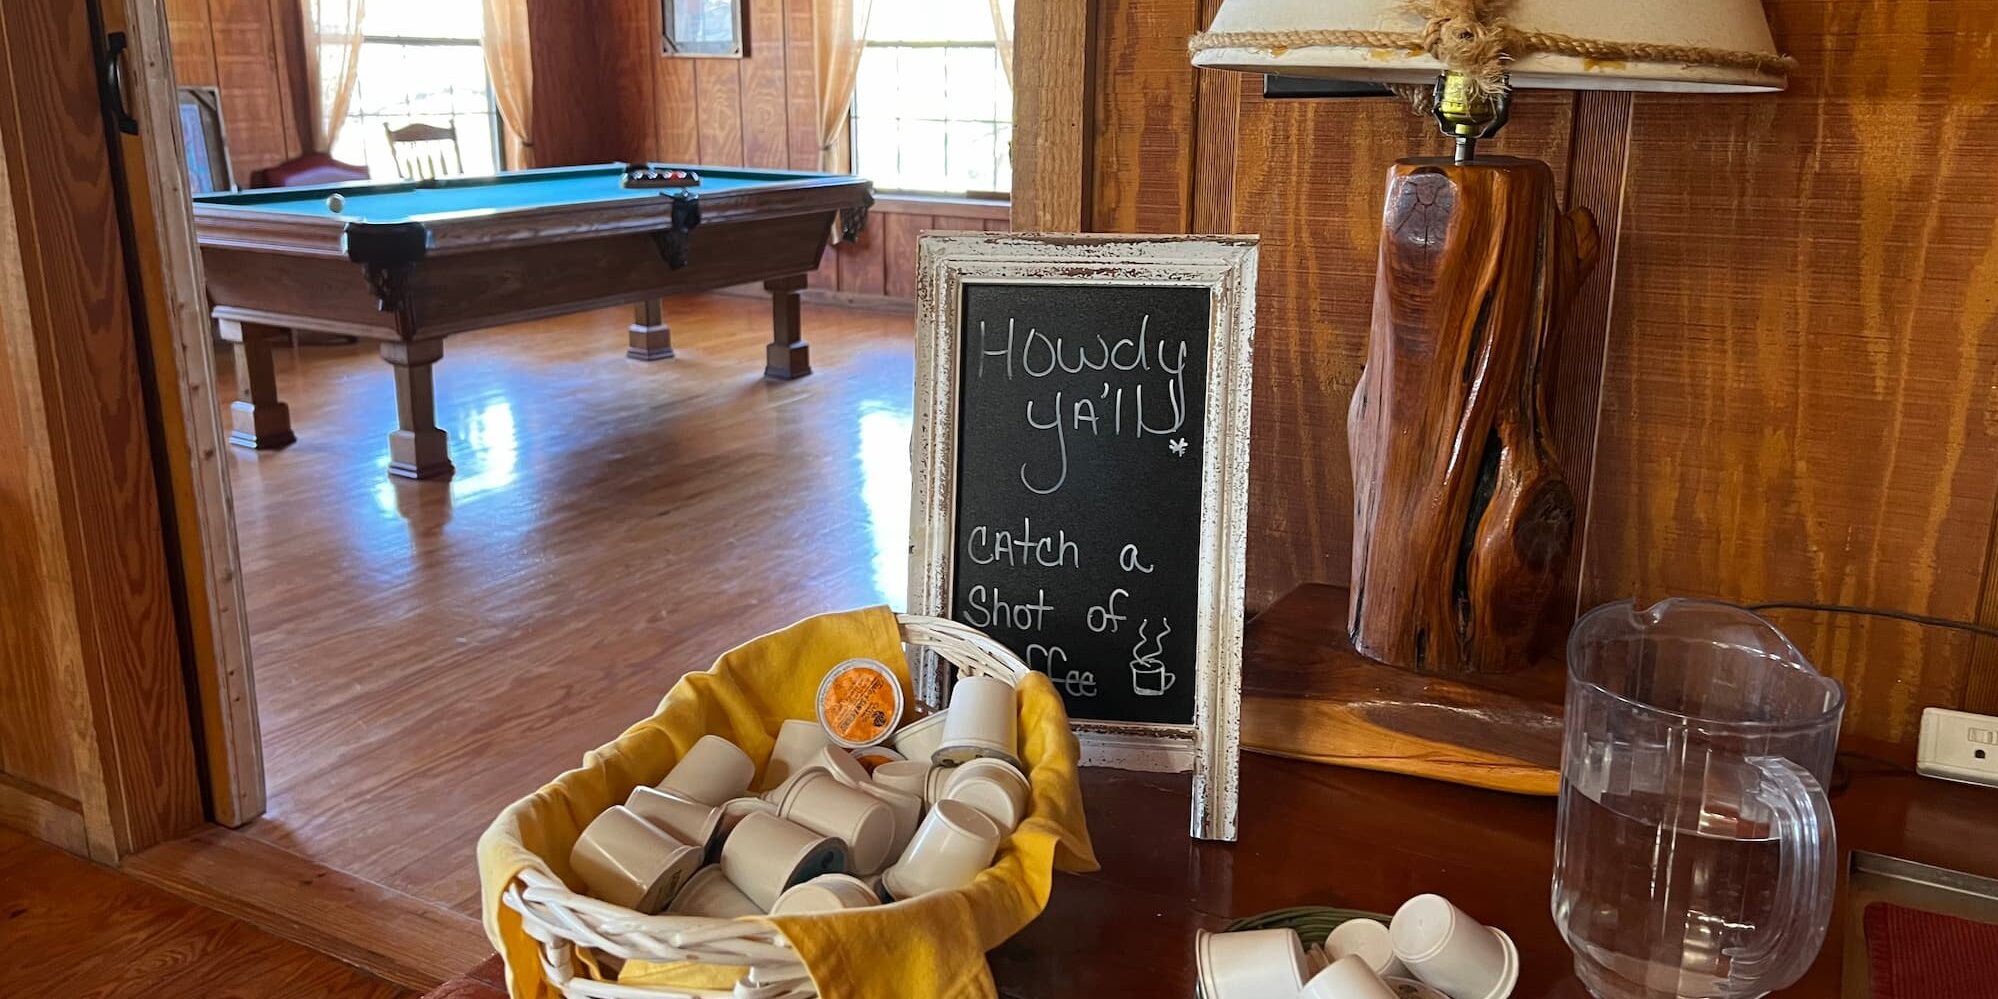 A small chalkboard sign welcomes guests on the counter of the coffee and tea area in the dining room